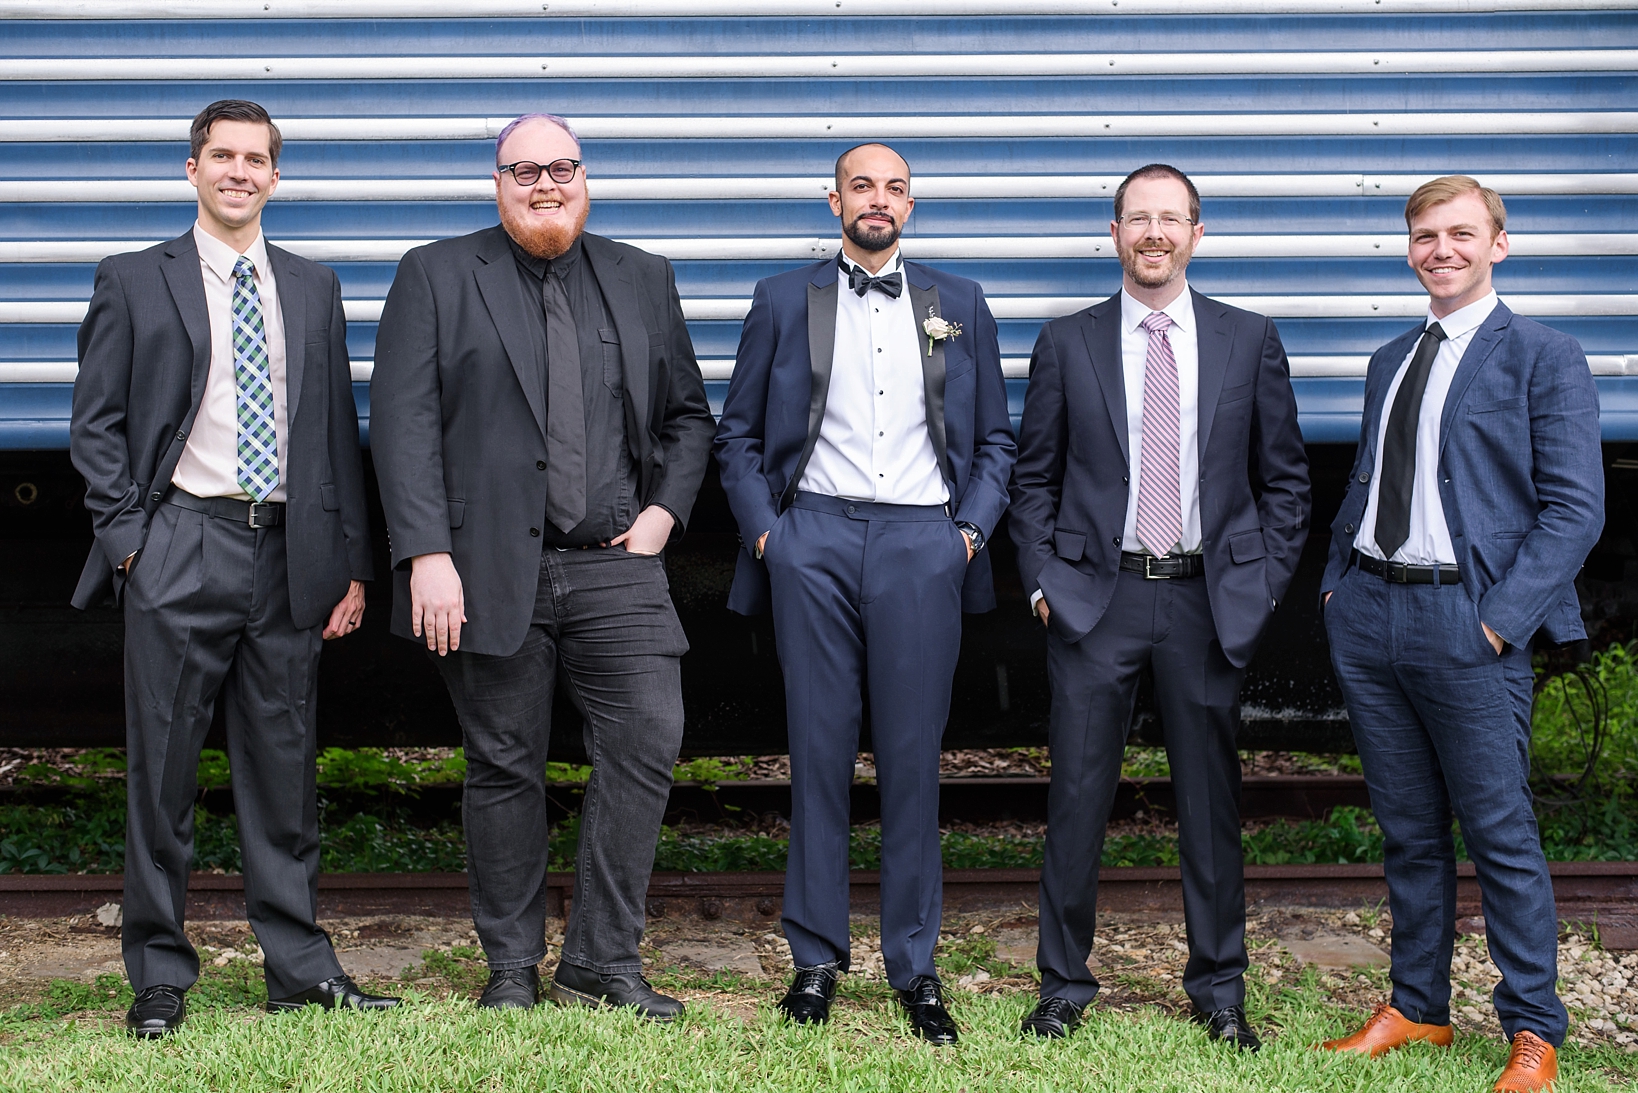 The groom with his groomsmen in mix matched suits by Sarah & Ben Photography